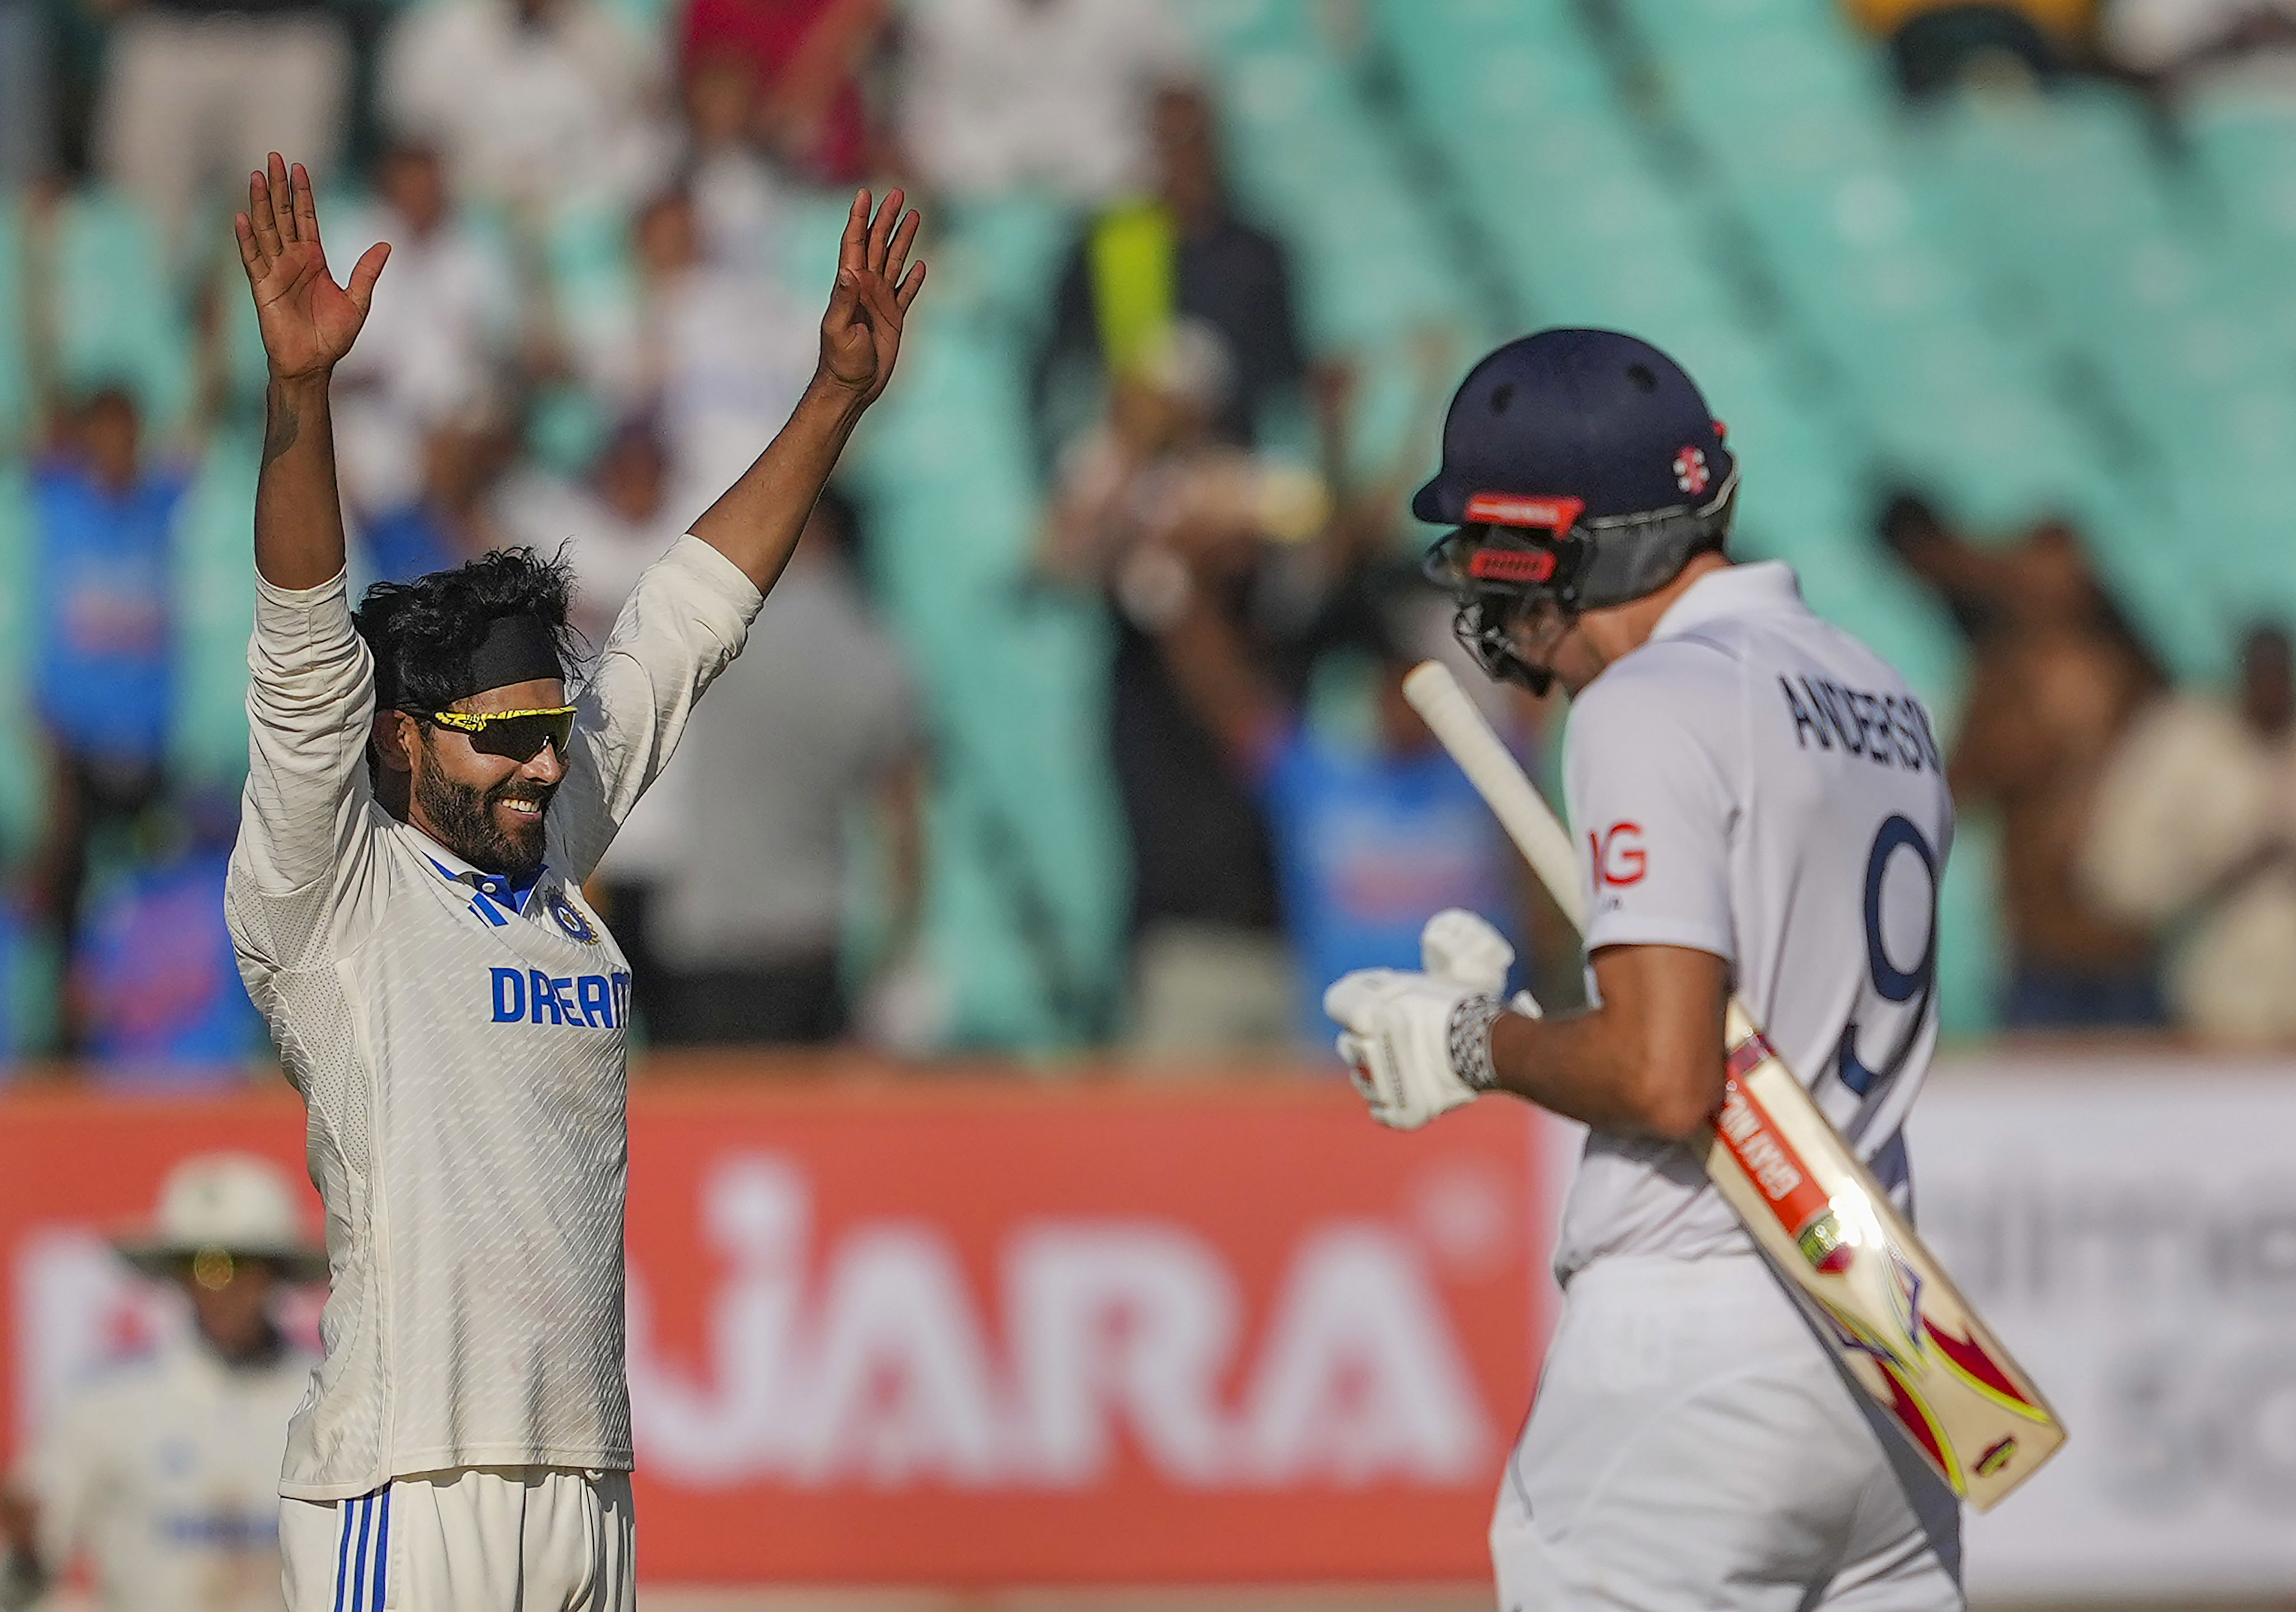 india annihilate england by 434 runs in 3rd test for their biggest-ever test win, take 2-1 lead